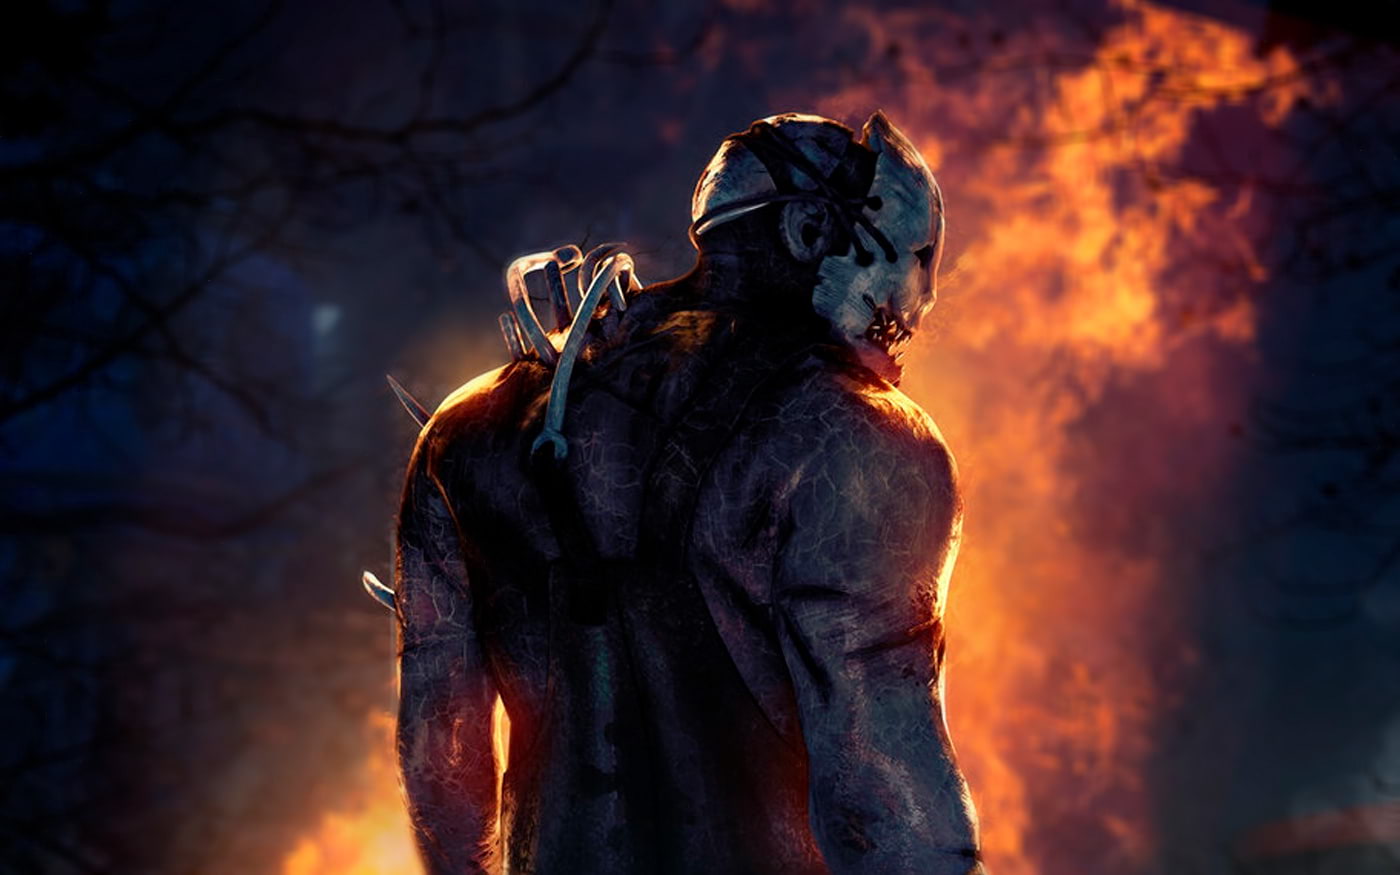 Dead by Daylight hits Android and iOS in March